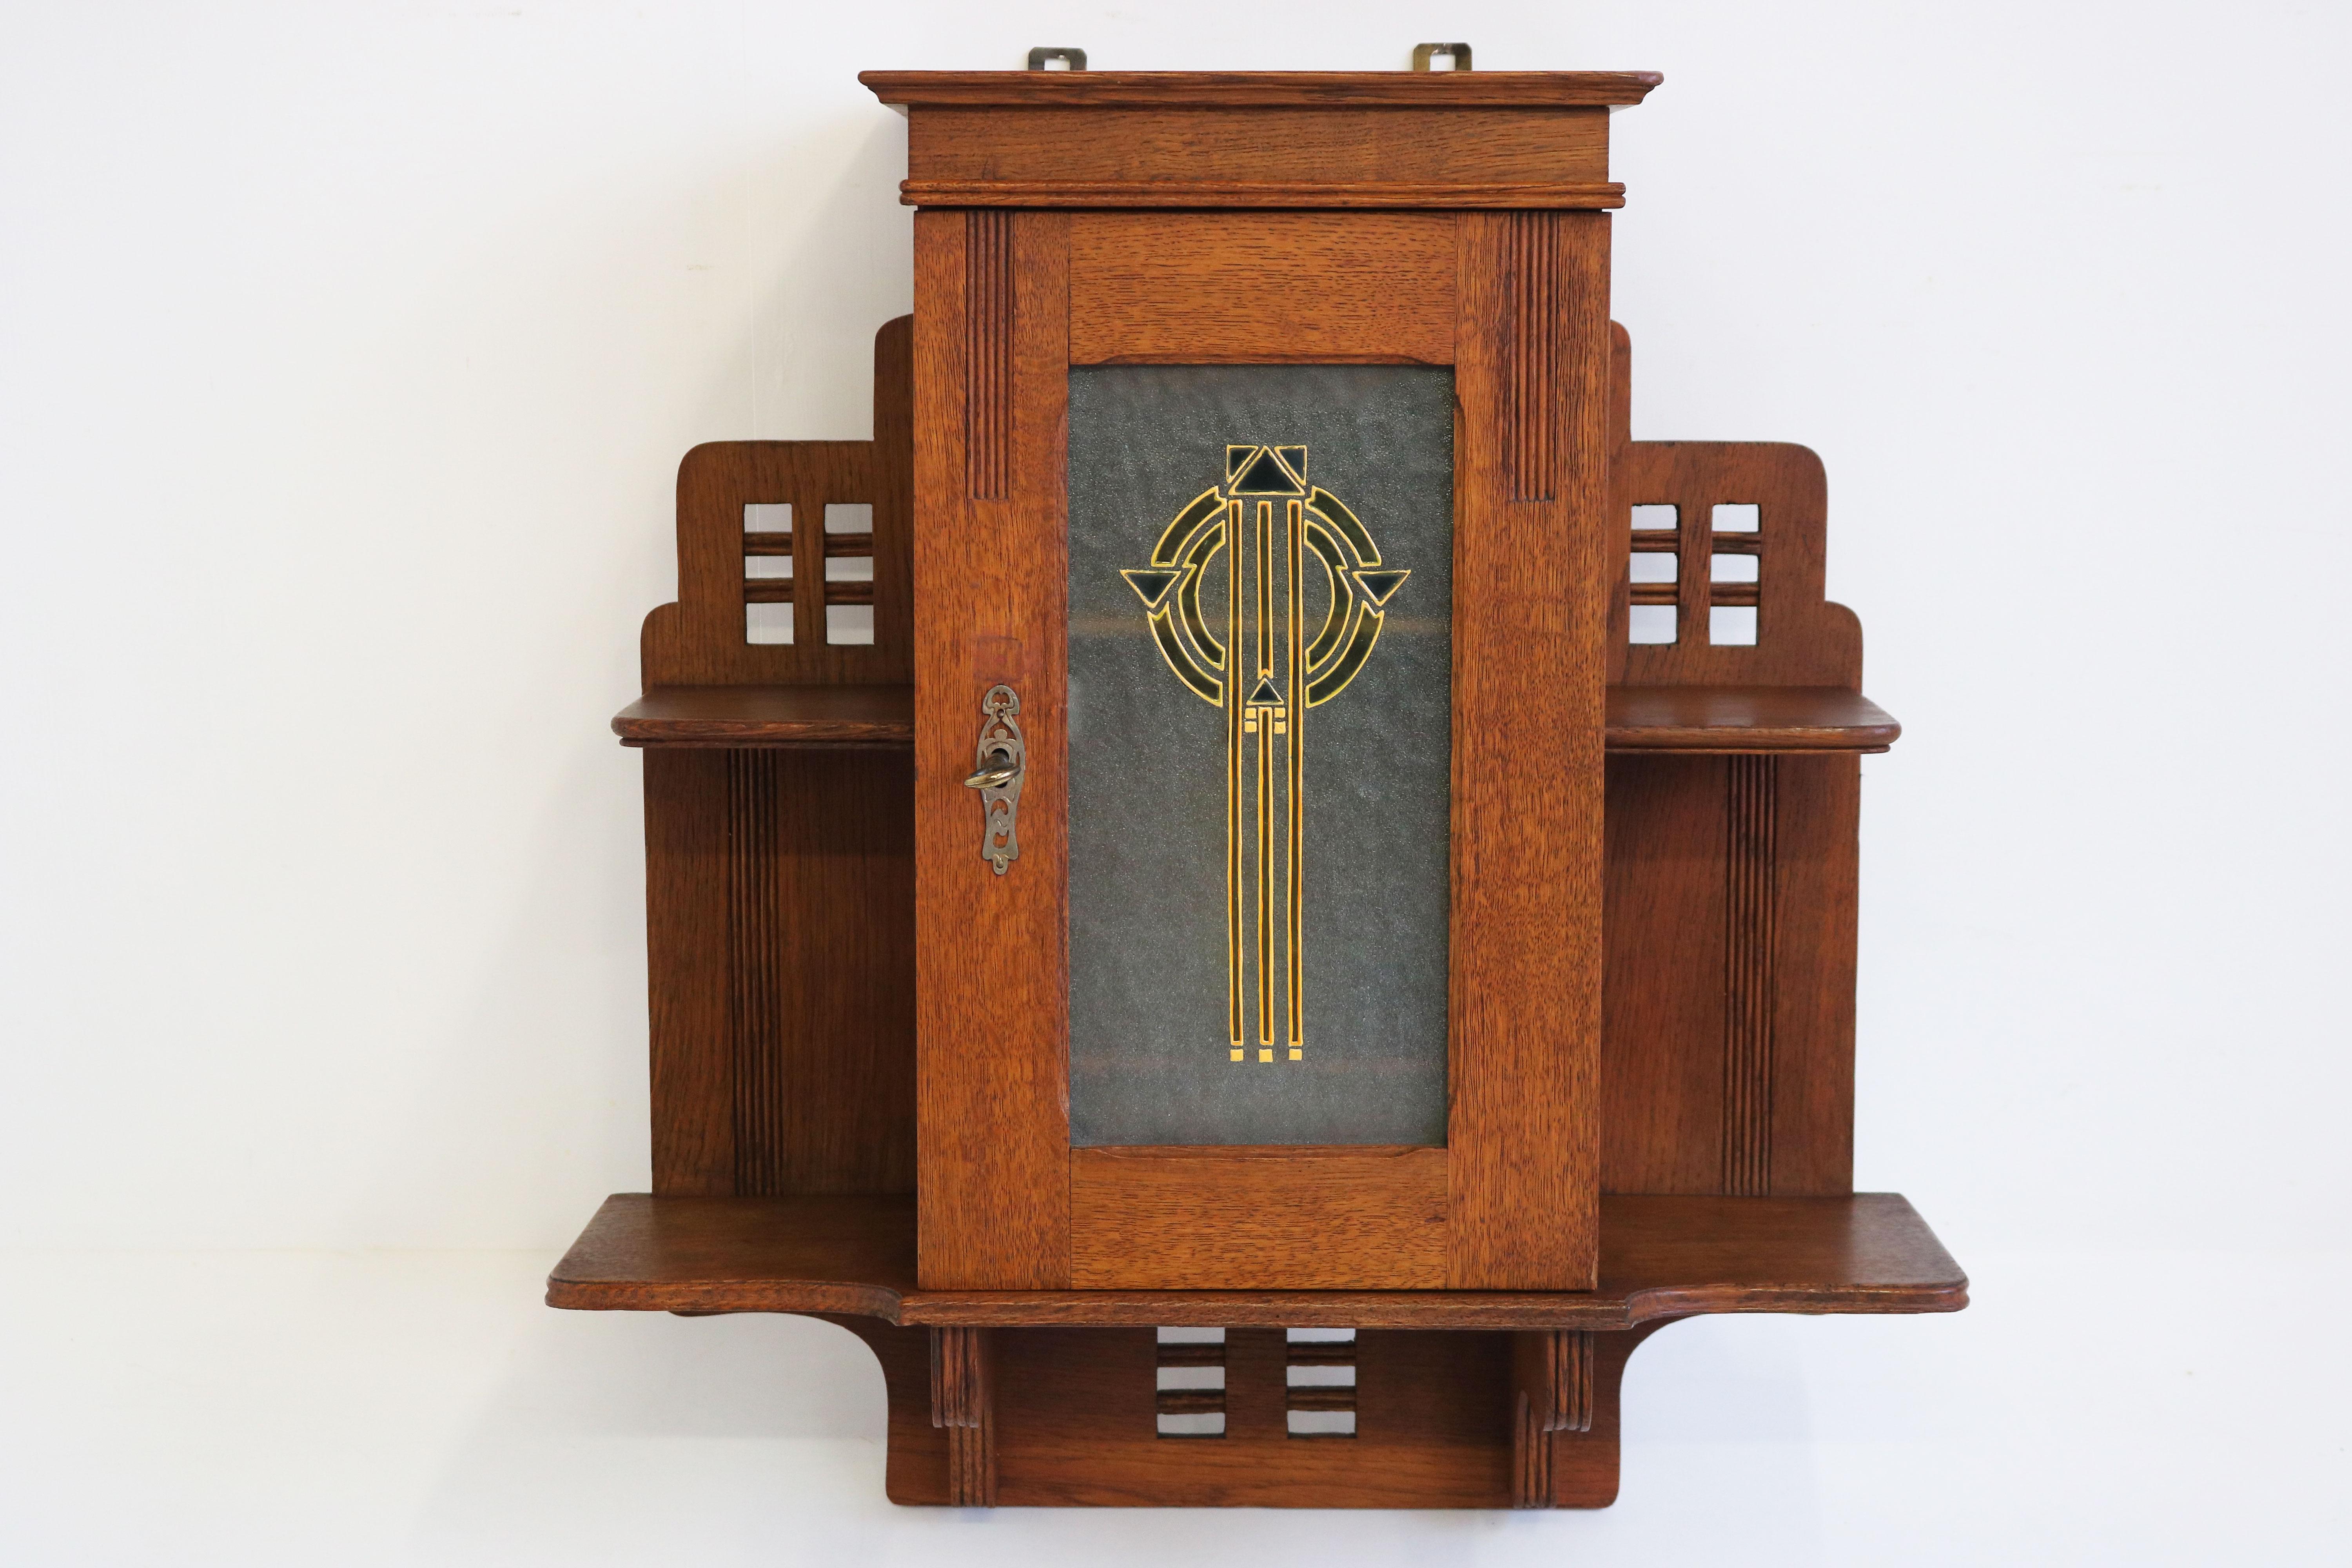 Breathtaking & exceptional! This antique French Art Deco wall cabinet 1920 with geometric enamel glass artwork.
Made out of solid carved European oak with amazing enamel glass art piece in Art Deco geometric shape. 
Interior has 1 shelf and 2